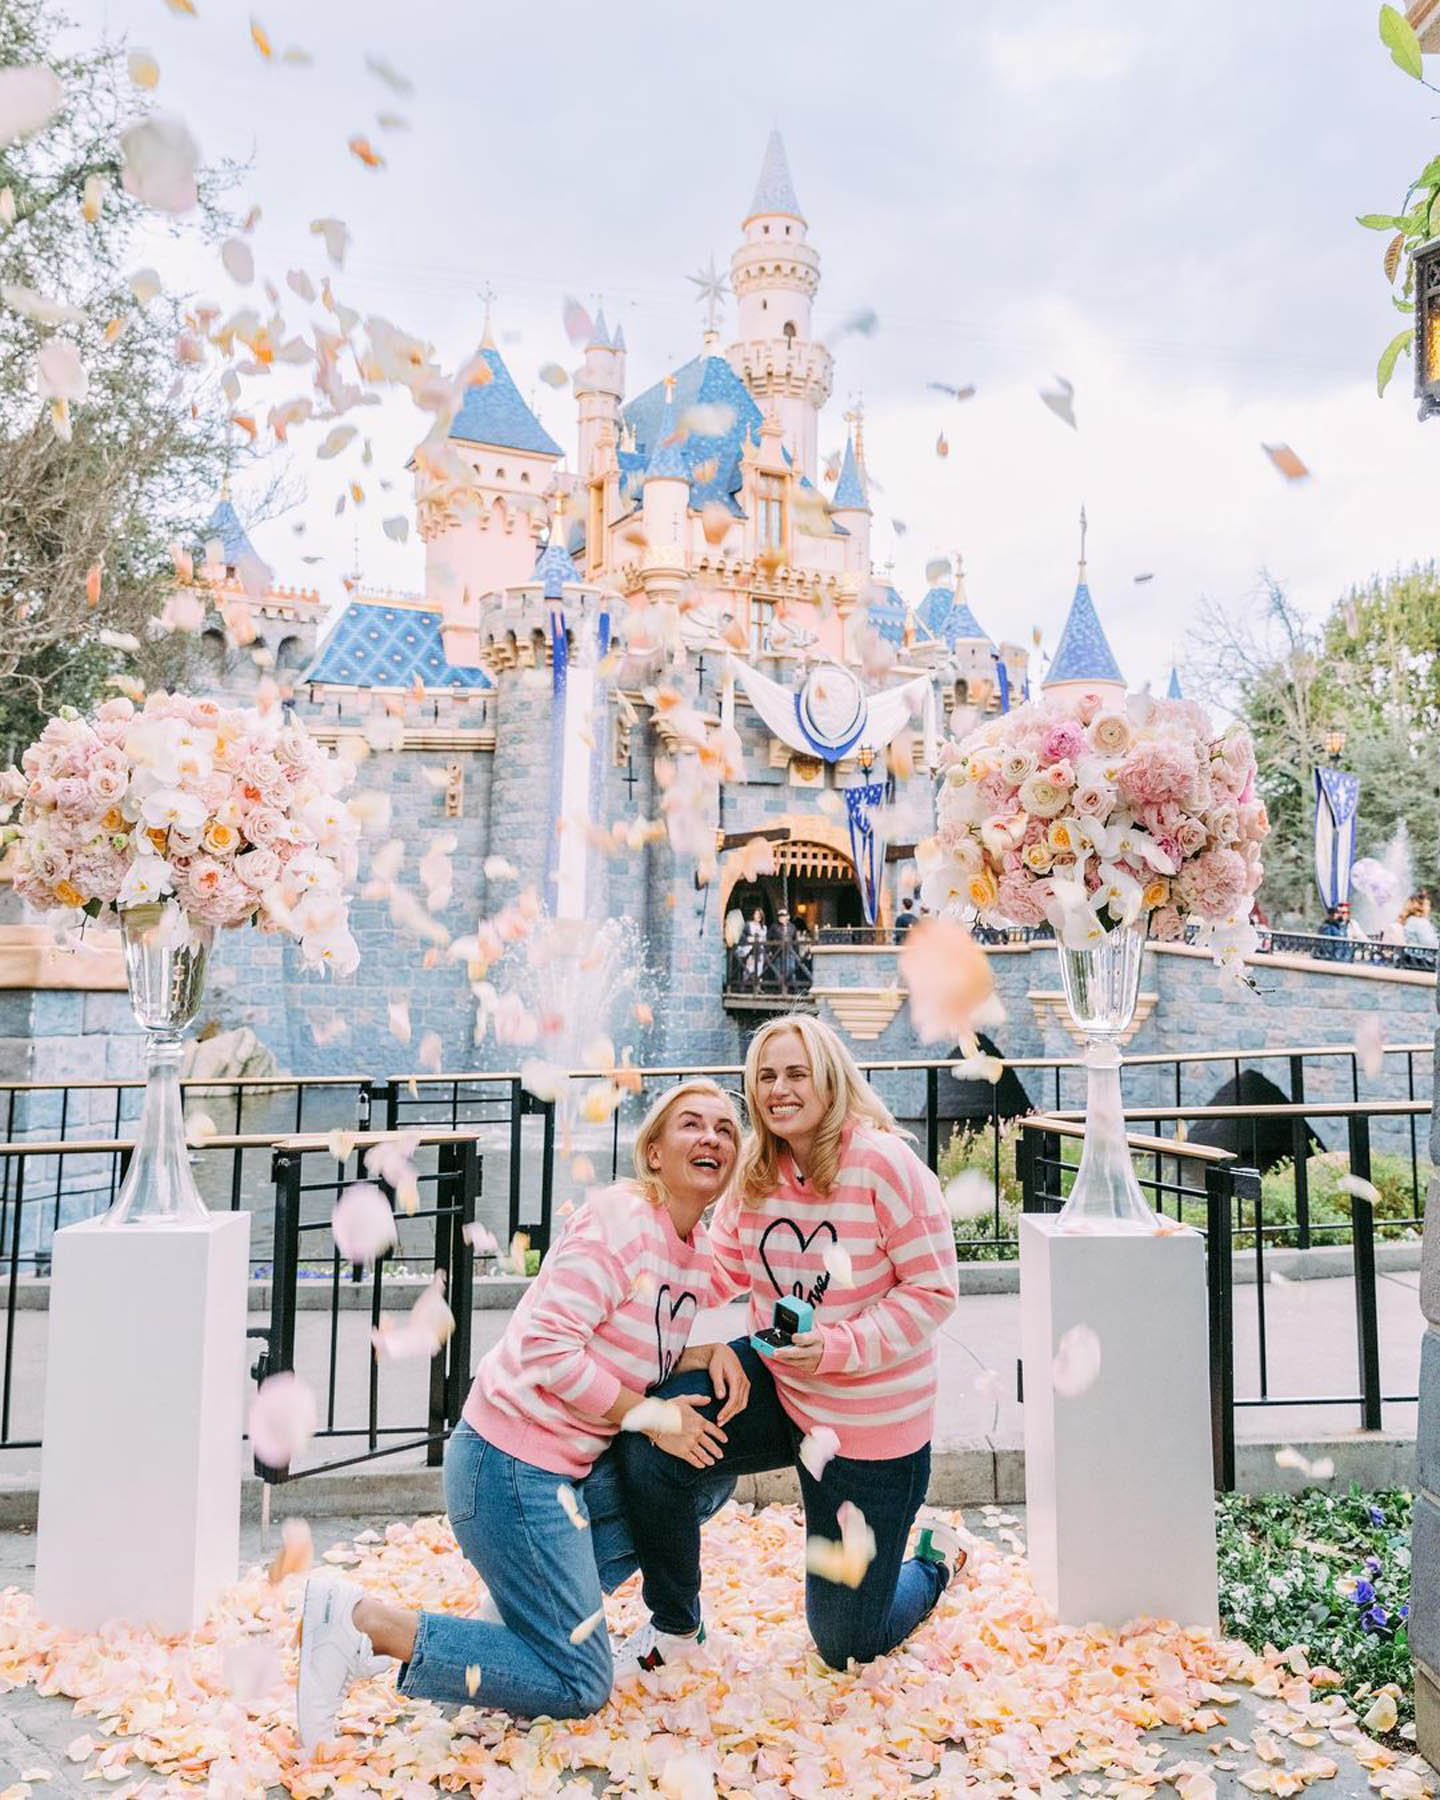 Pitch Perfect star Rebel Wilson announces magical Disneyland engagement pic pic